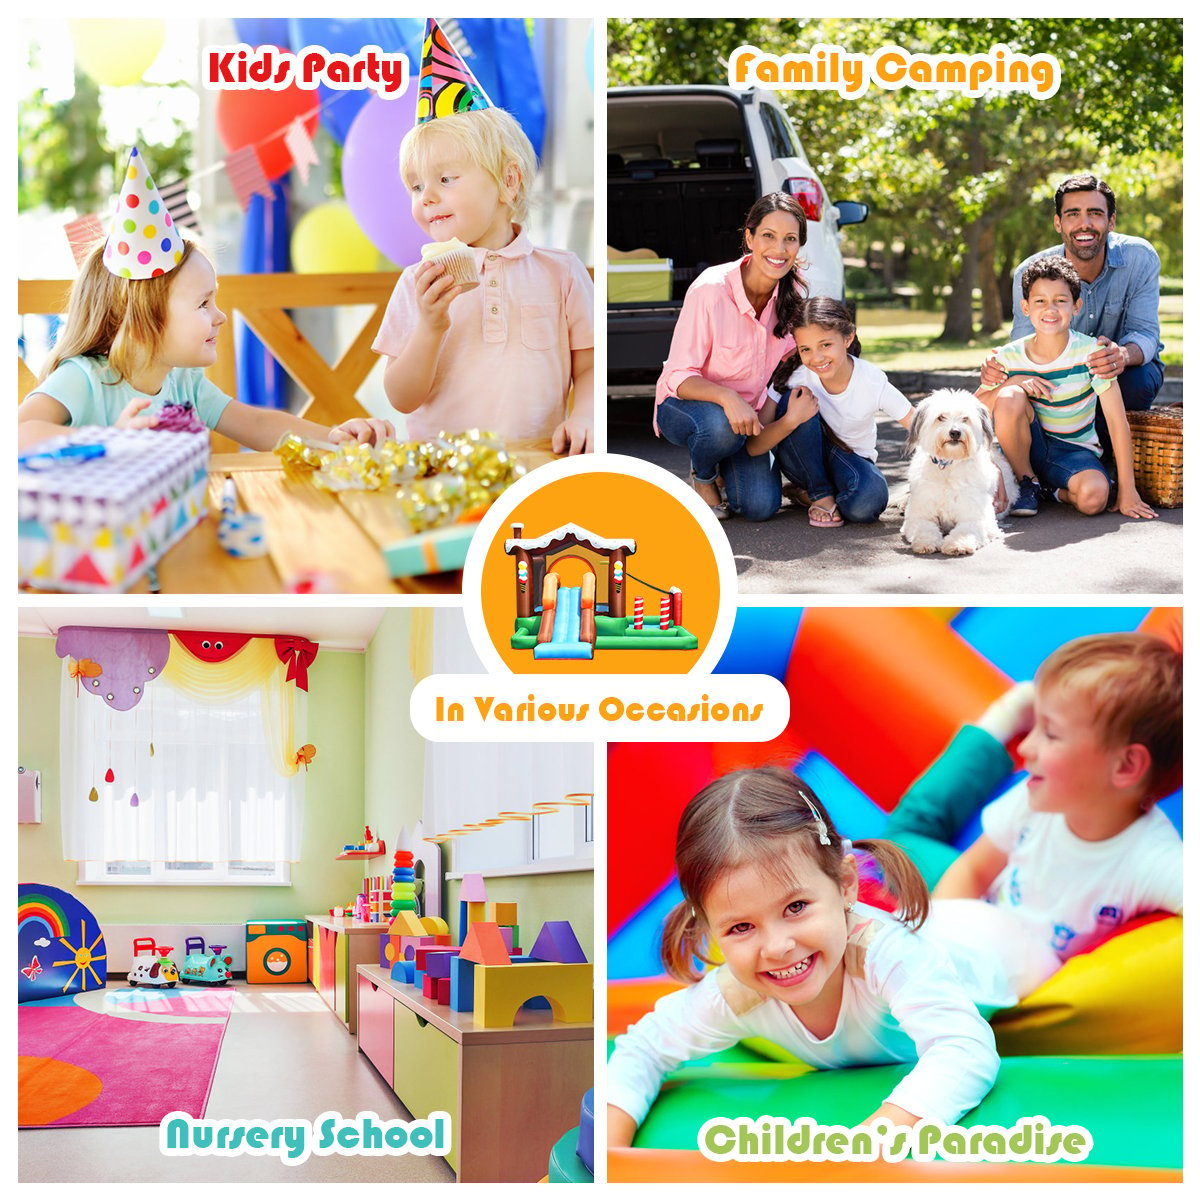 Kids Inflatable Bounce House Jumping Castle Slide Climber Bouncer with 550W Blower, Multicolor